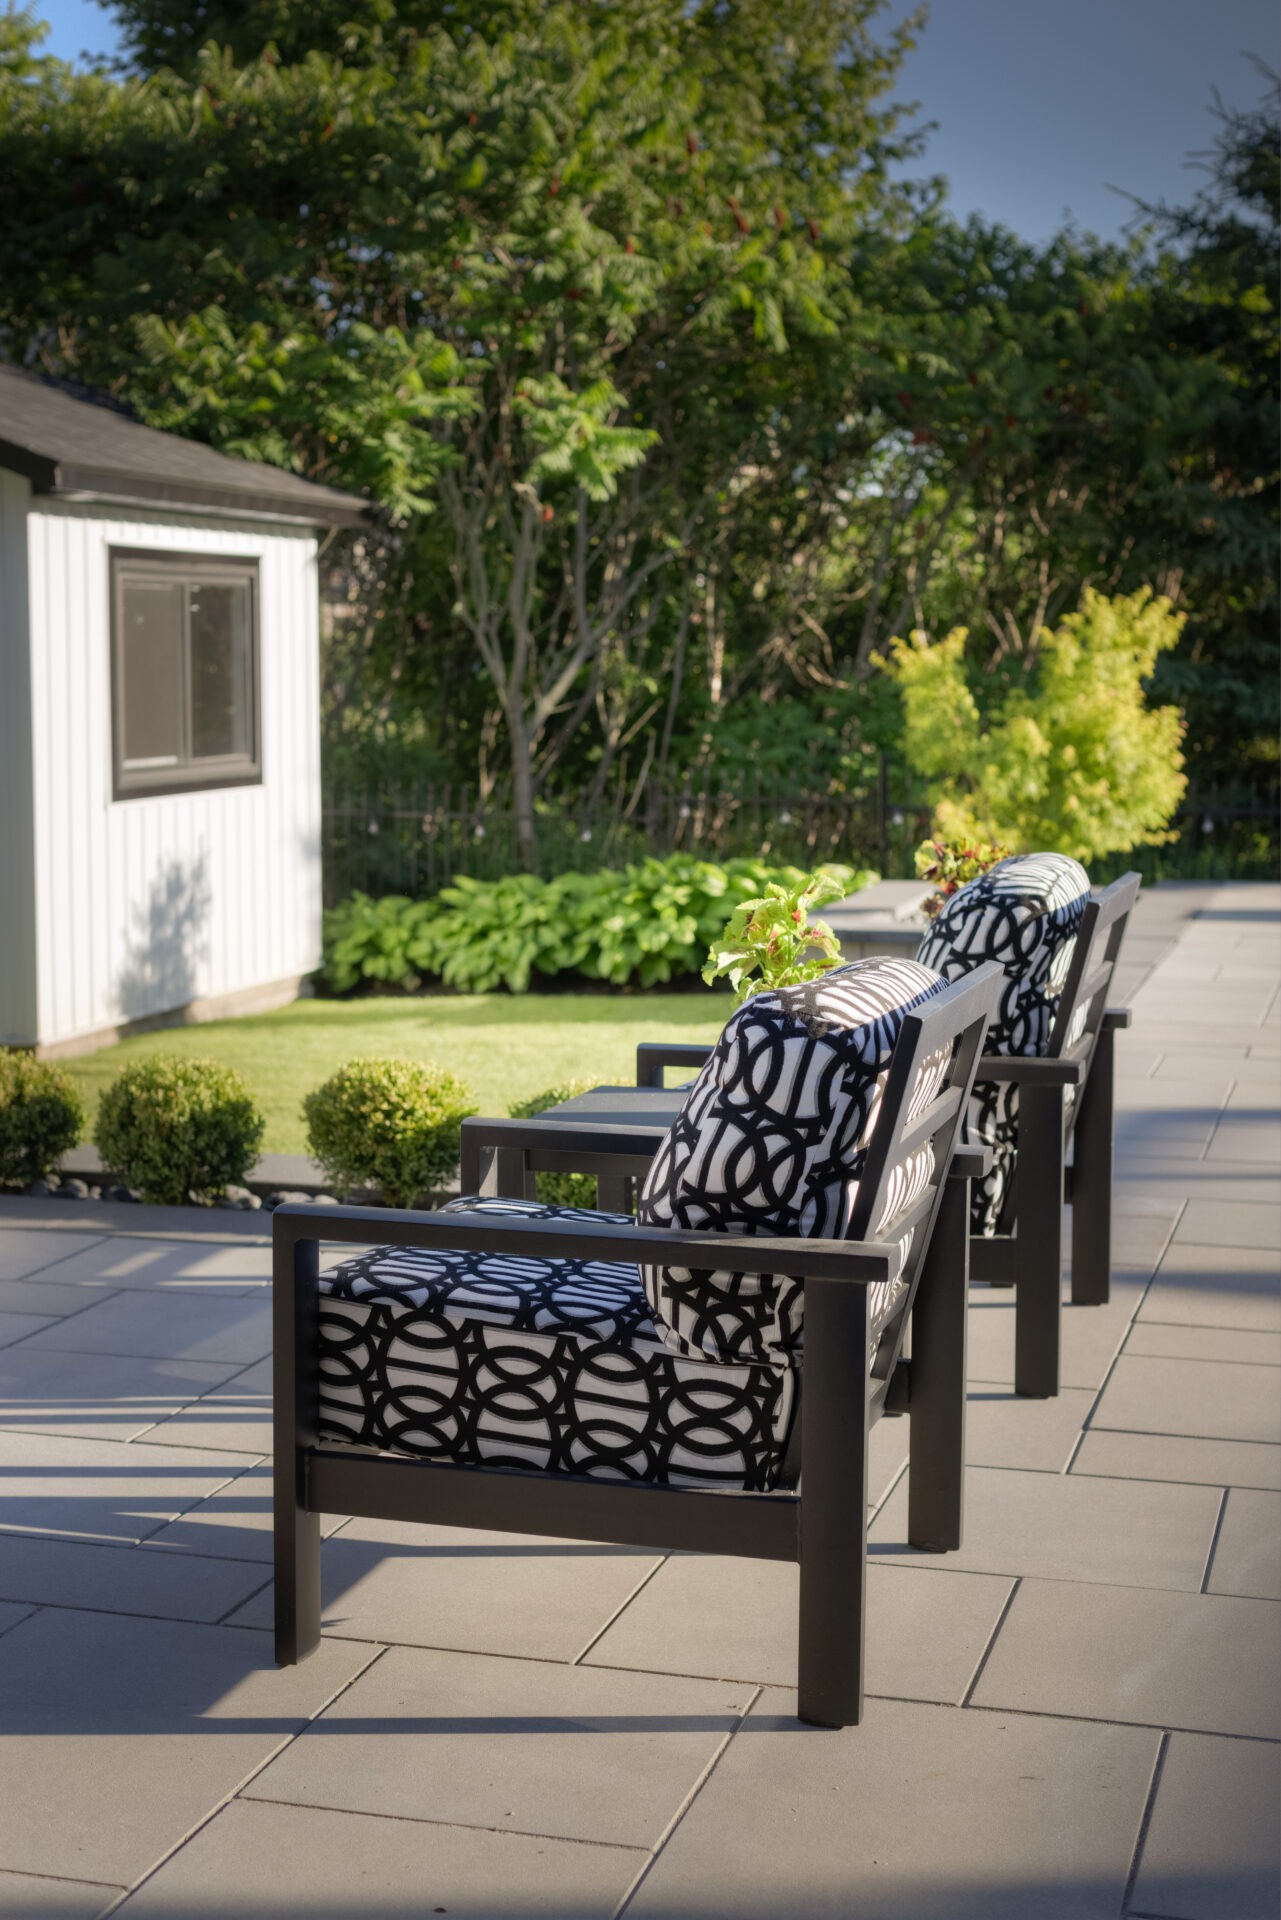 This image shows a line of stylish outdoor chairs with patterned cushions on a paved patio, surrounded by lush green vegetation and a white shed.